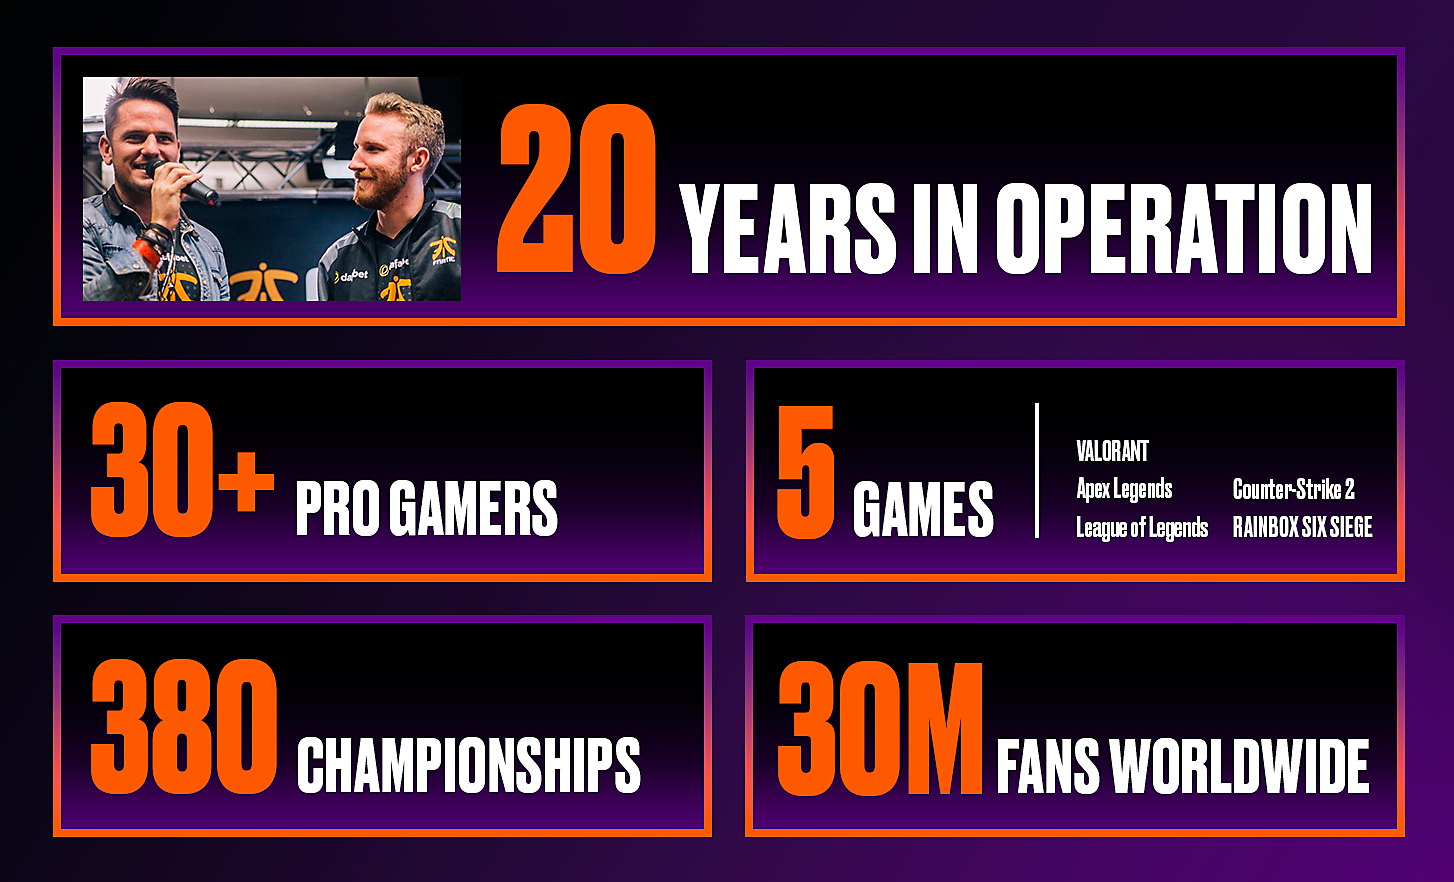 Five boxes display various Fnatic stats, including years in operation and number of pro gamers, games, championships and fans